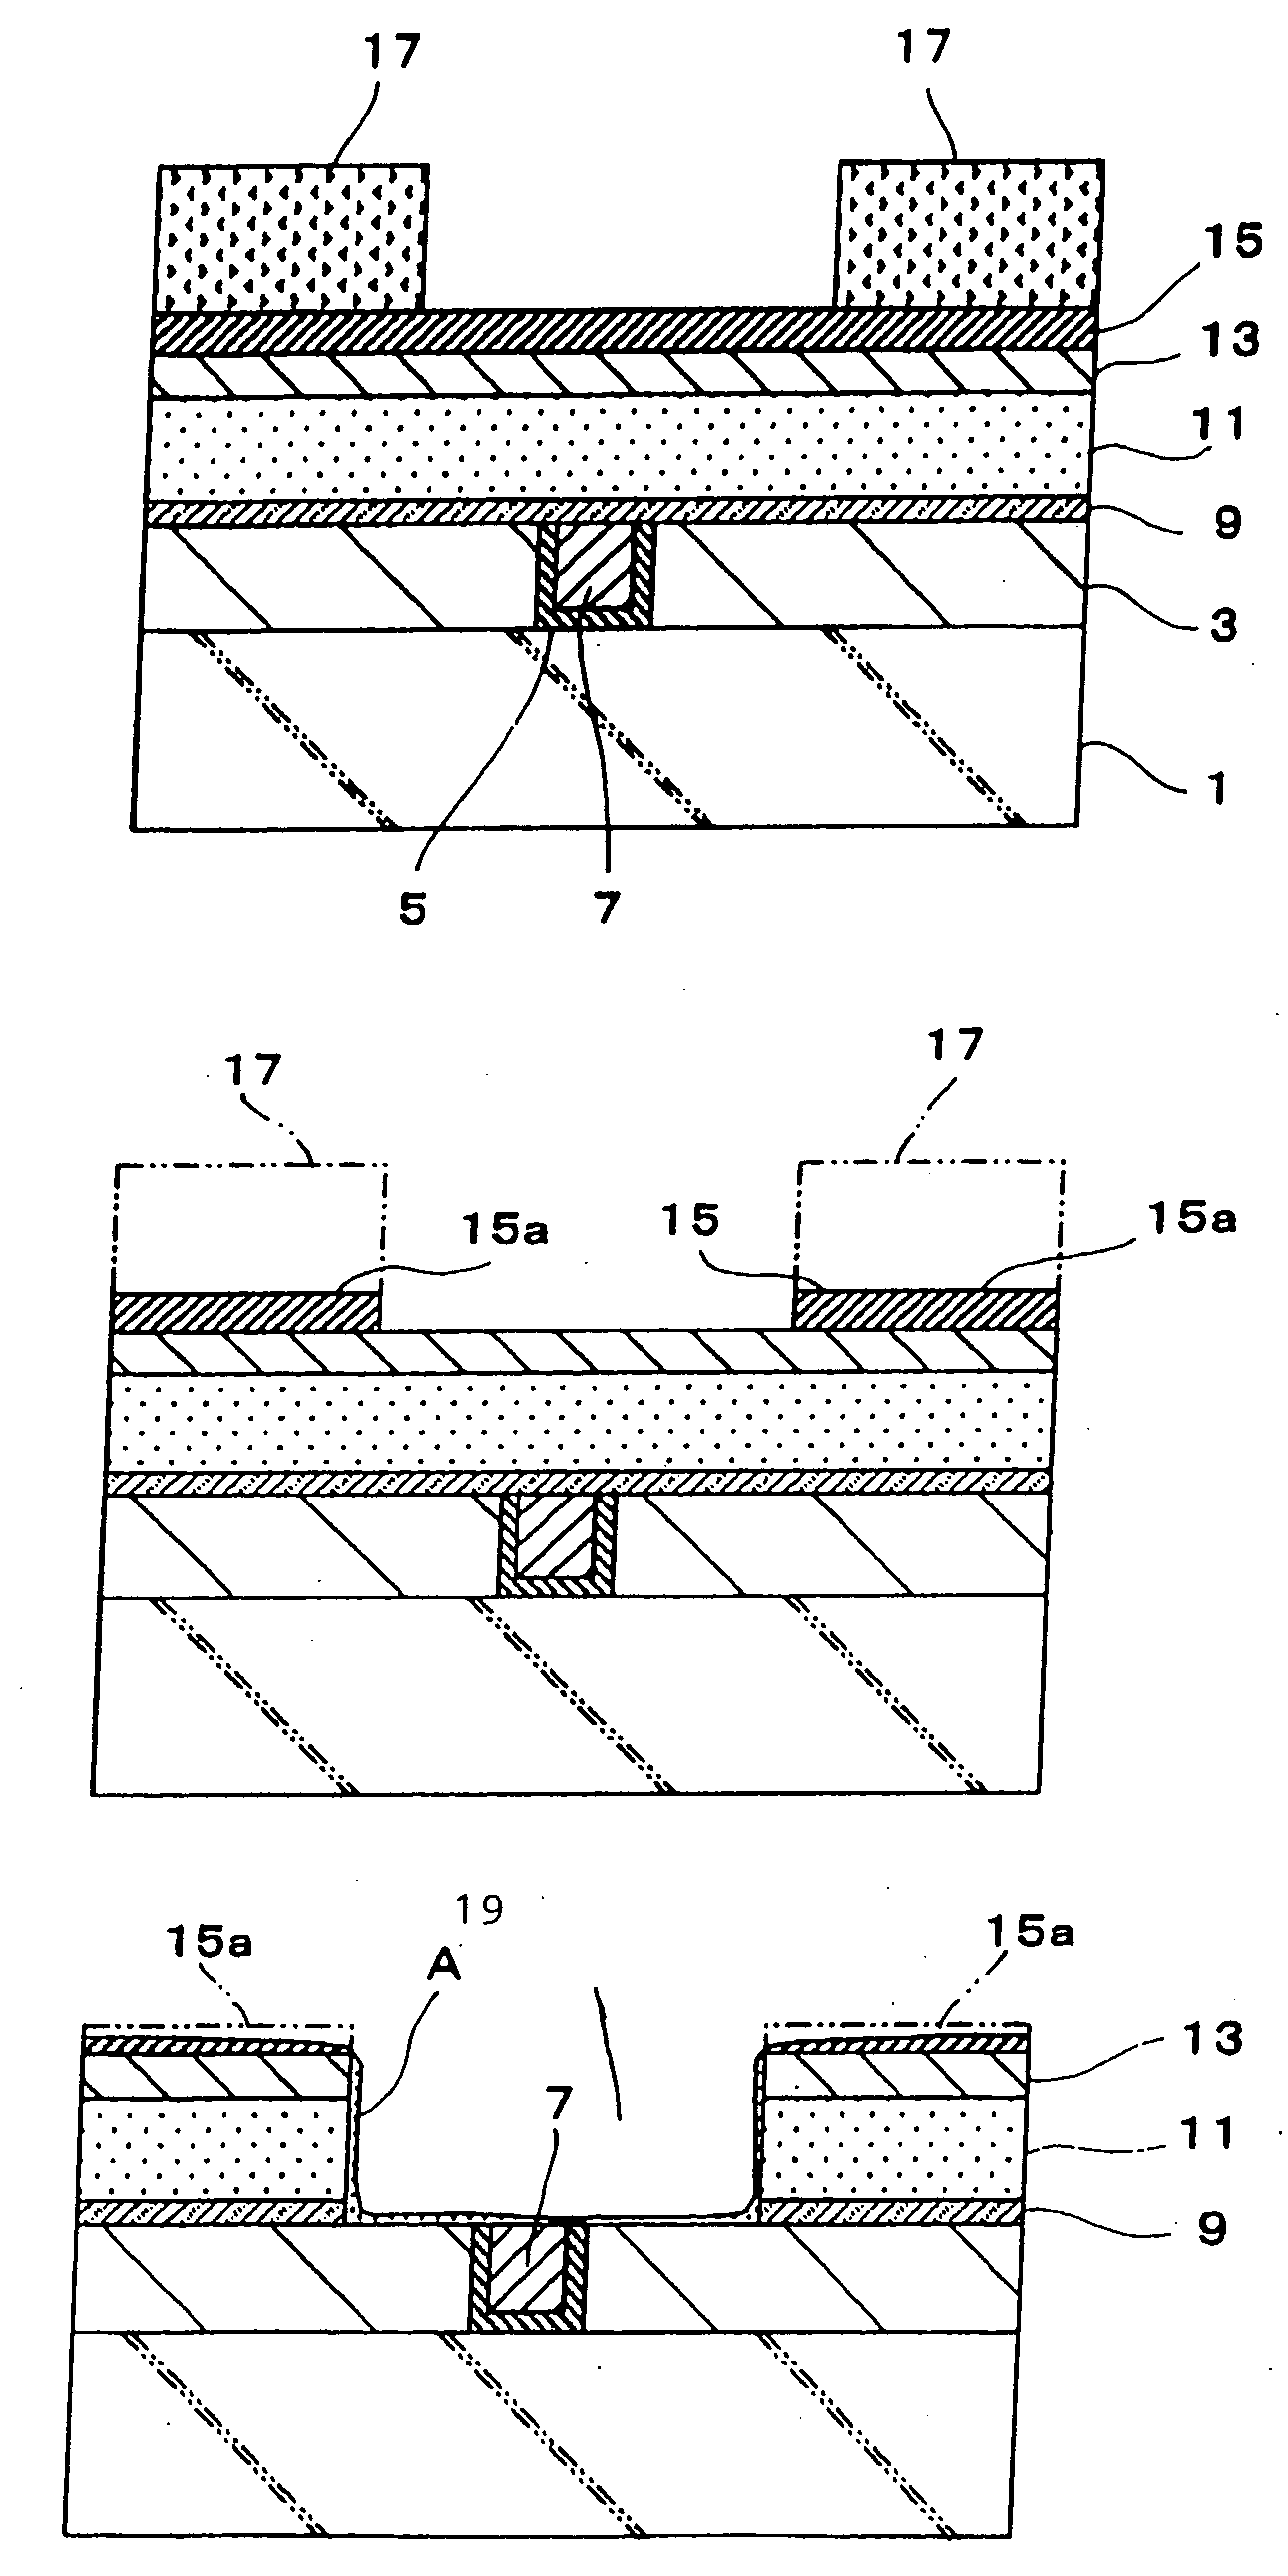 Post-dry etching cleaning liquid composition and process for fabricating semiconductor device